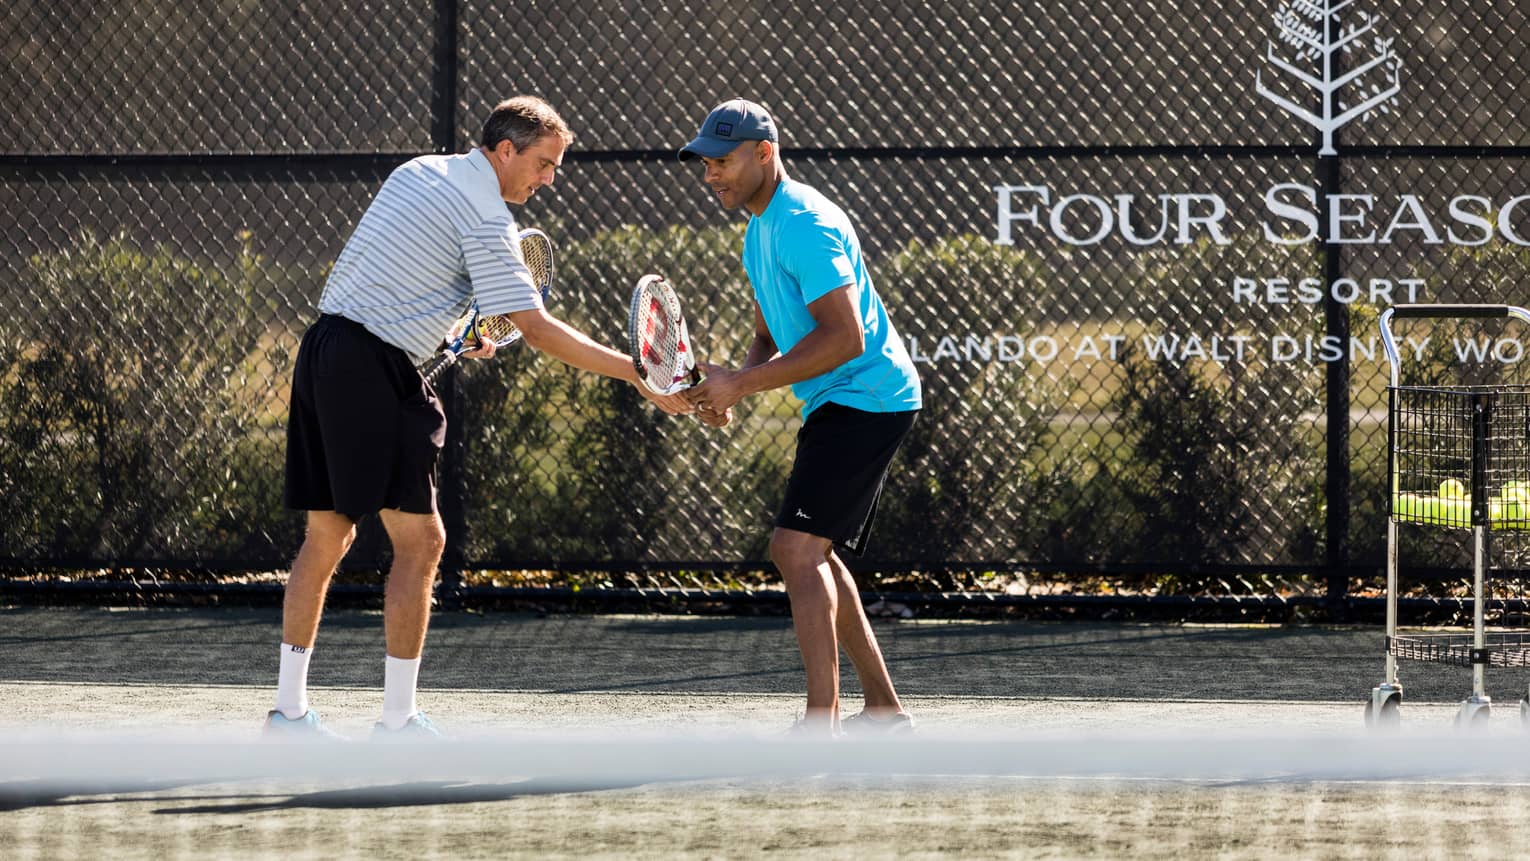 Tennis pro helps man adjust his racket on tennis court by Four Seasons Resort logo on fence